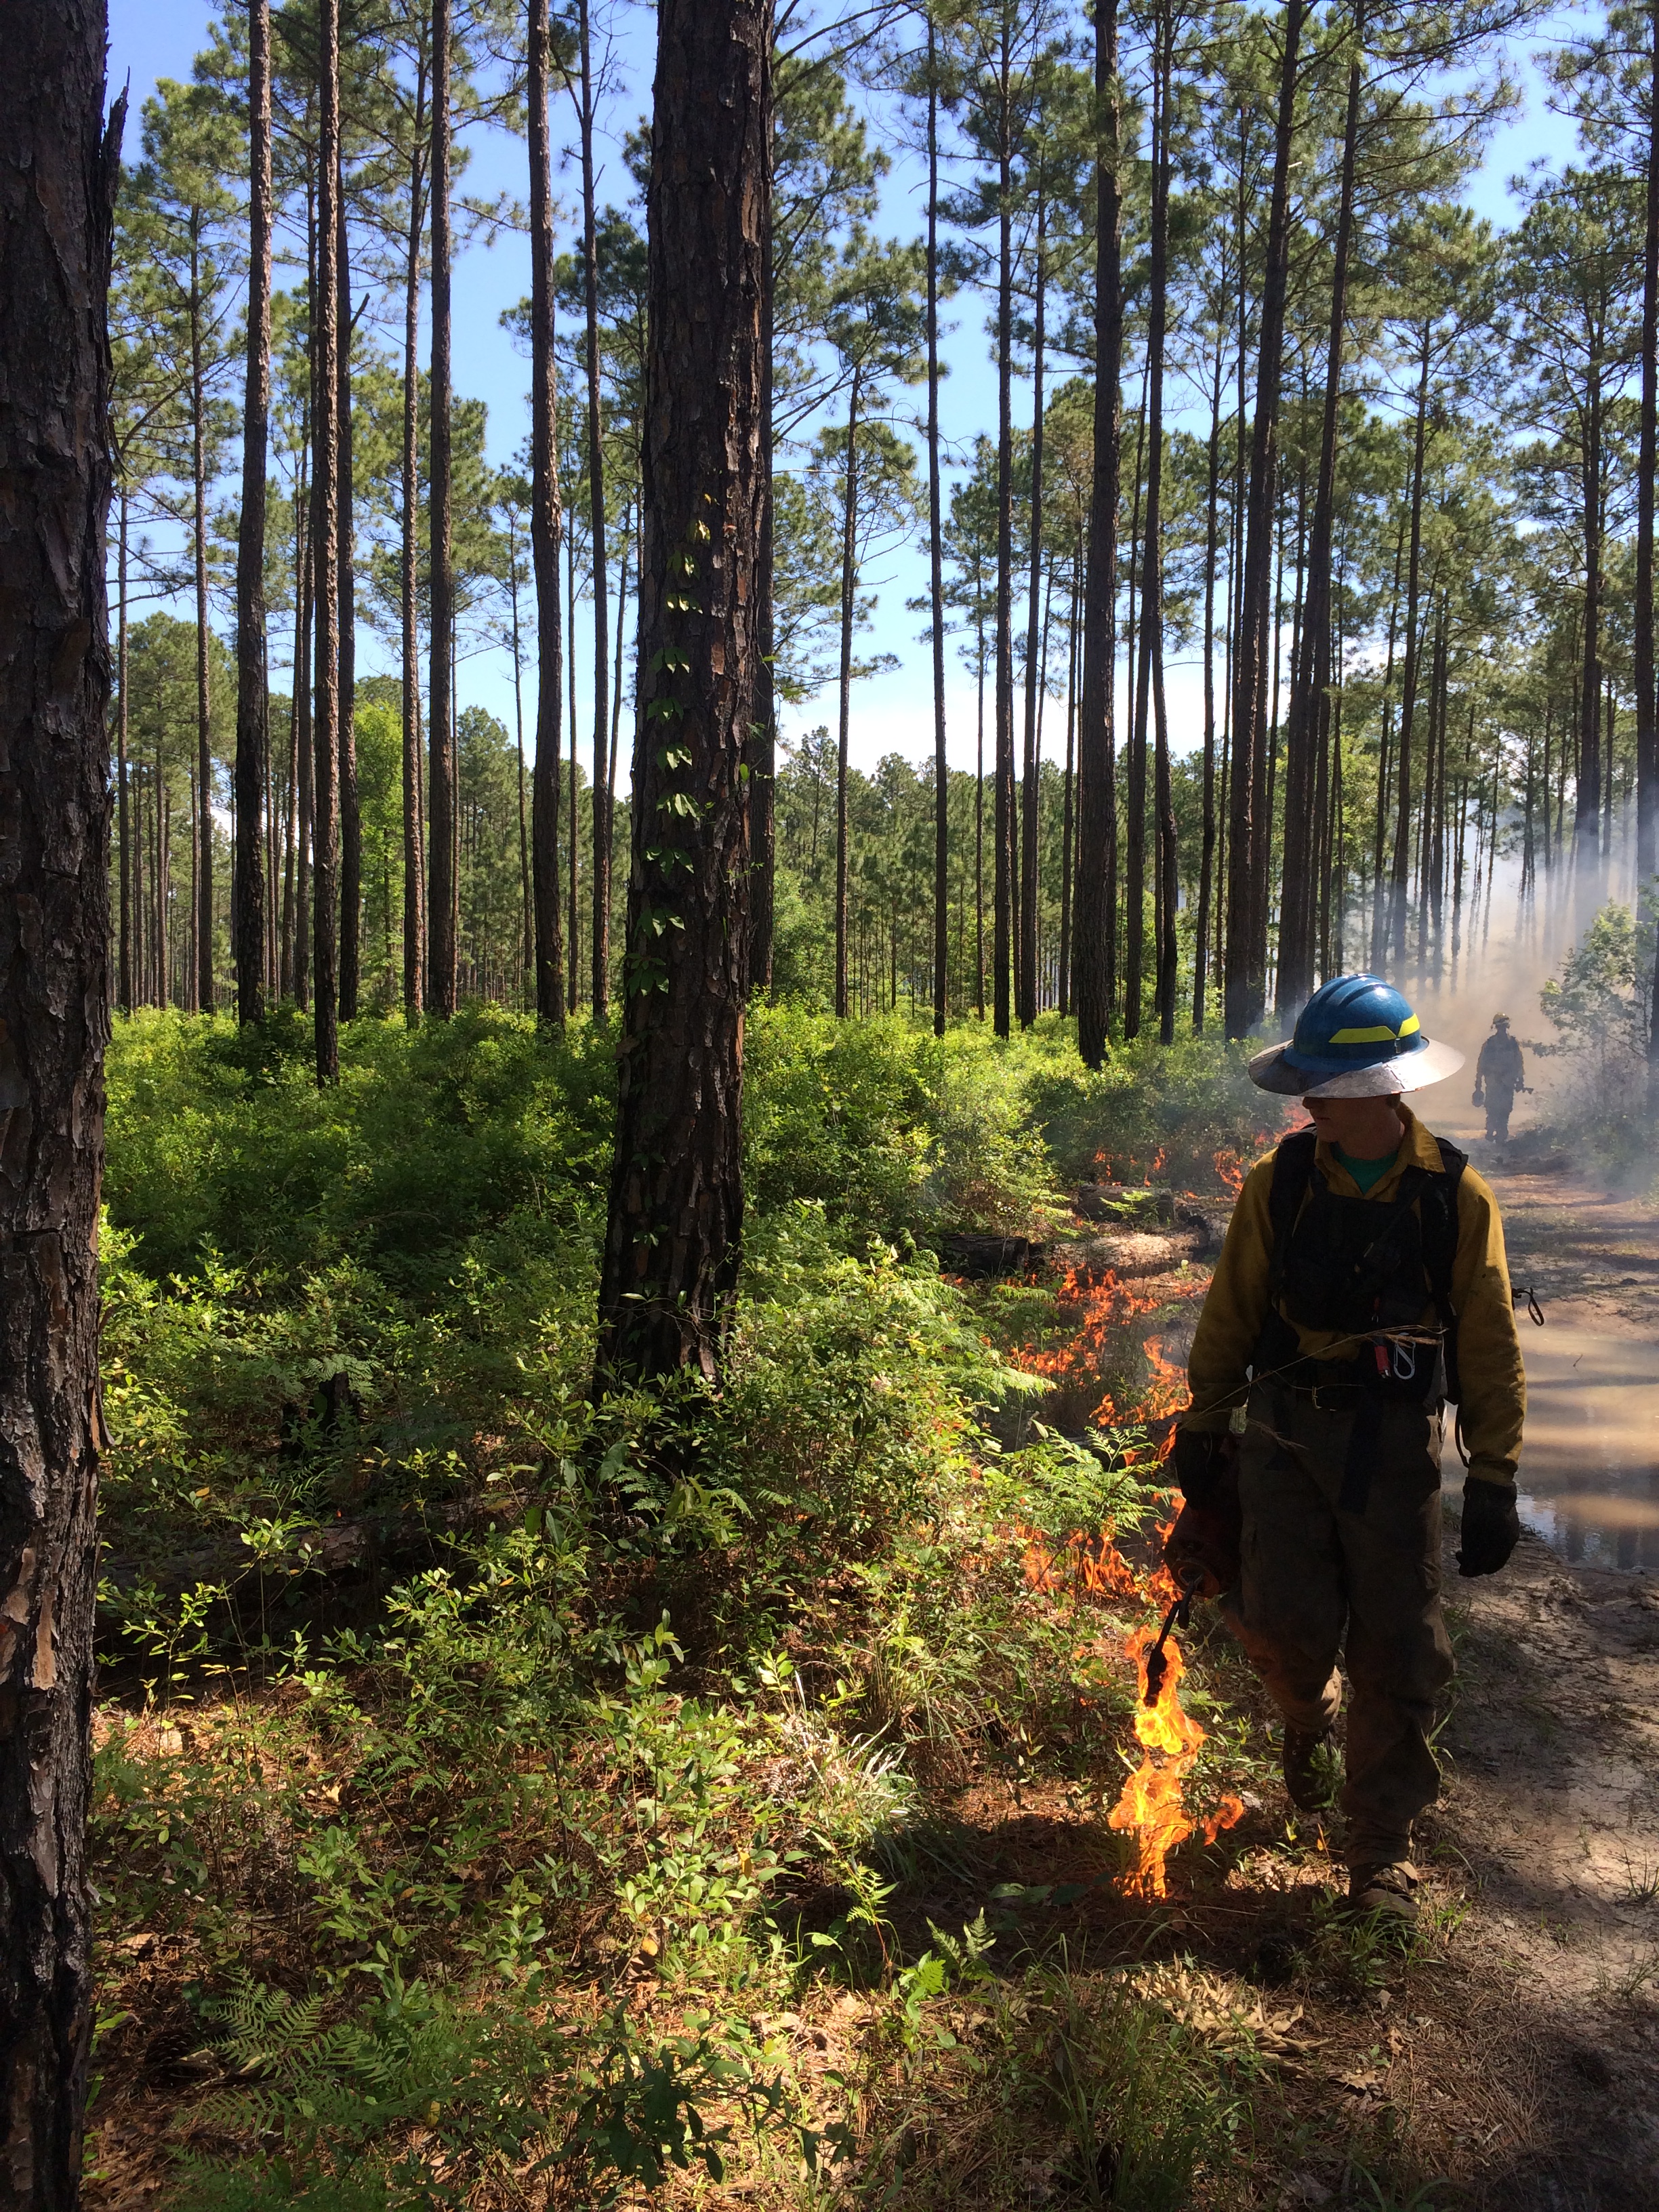 A member of the interagency burn team dressed in a yellow firesuit holds a red drip torch, lighting a controlled burn line in the woods.